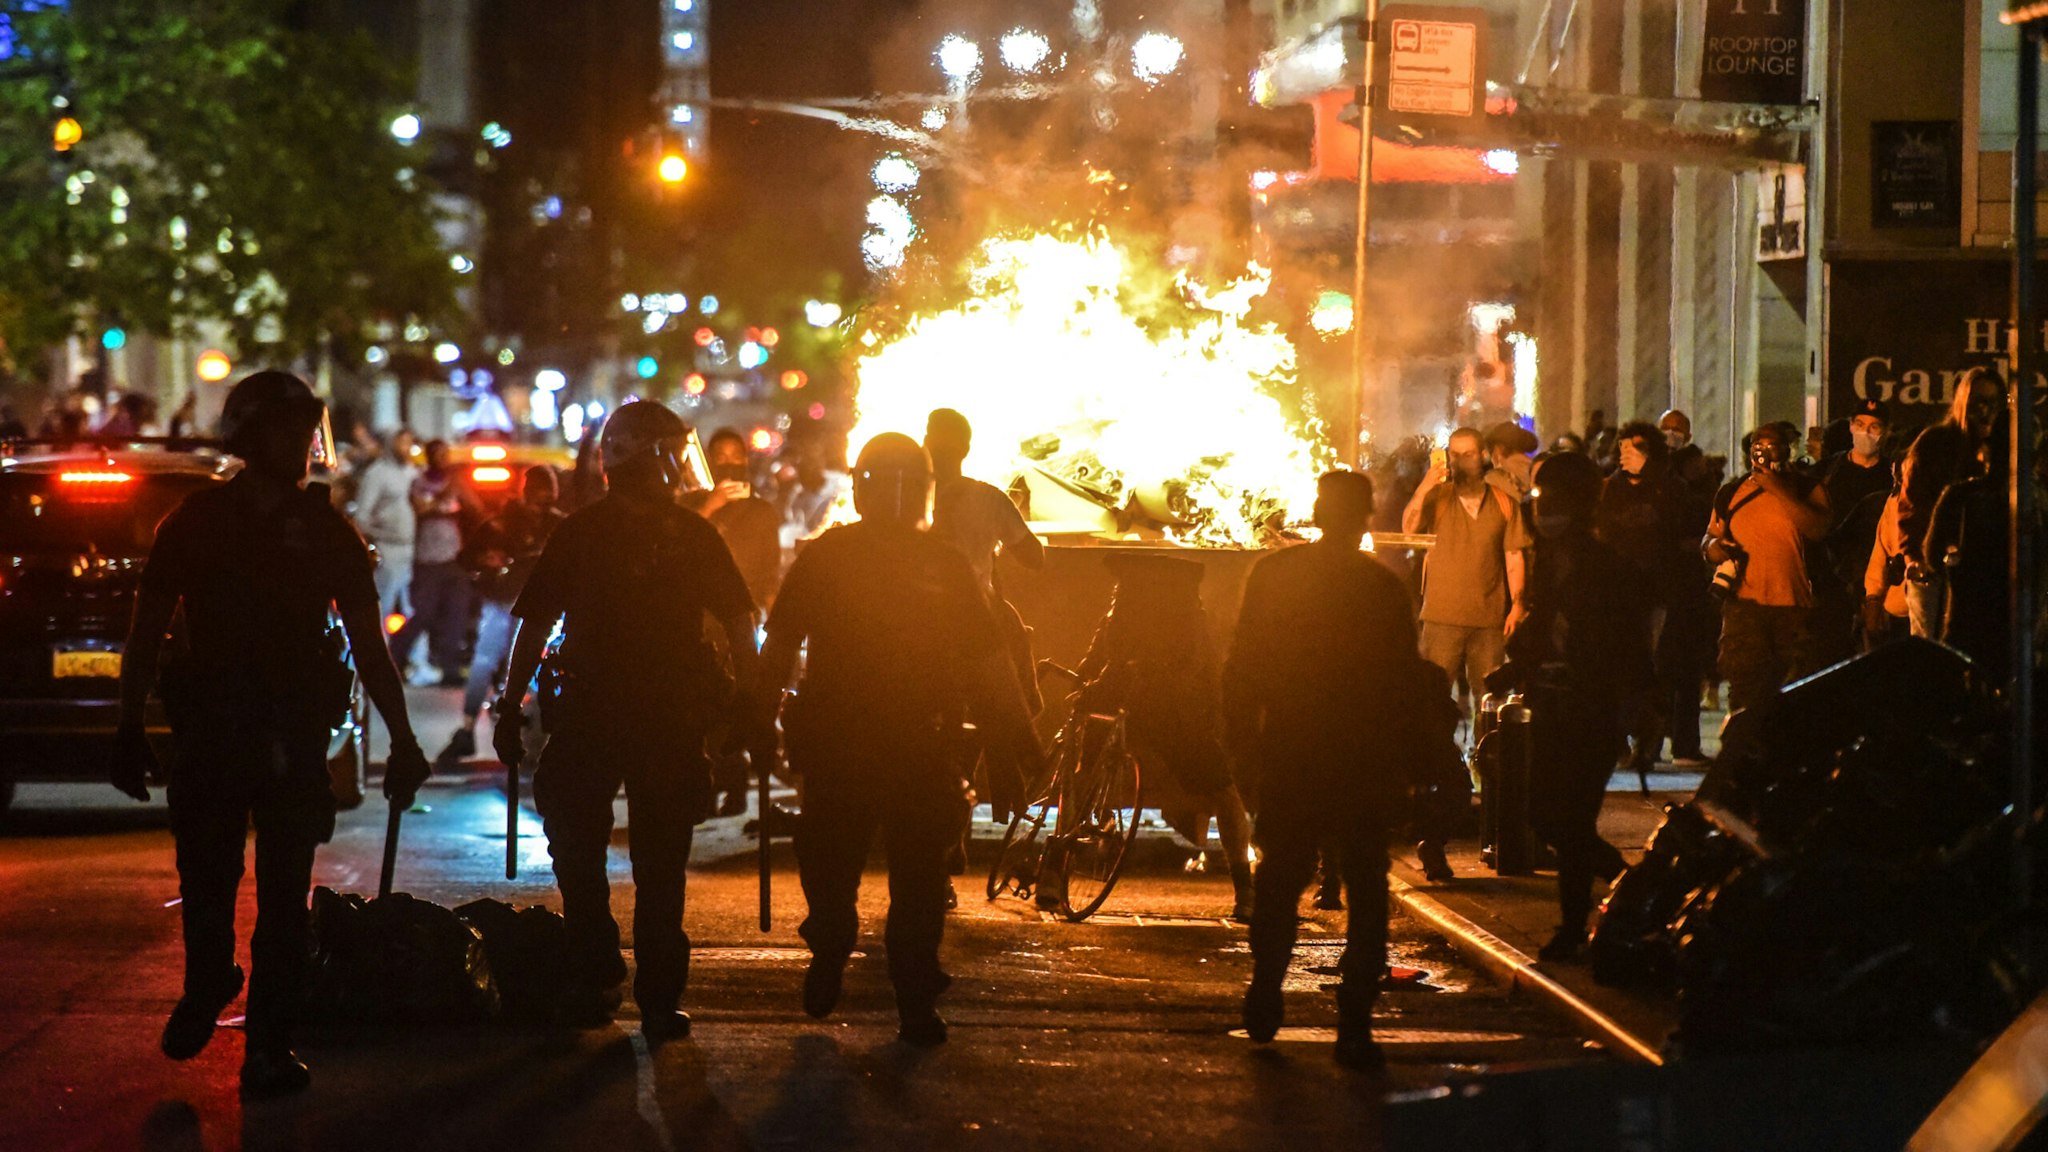 NEW YORK, NY - MAY 31: Protesters set a dumpster on fire on May 31, 2020 in New York City. Major cities across the United States have seen increased protests against police brutality and civil unrest since the death of George Floyd while in Minneapolis police custody.